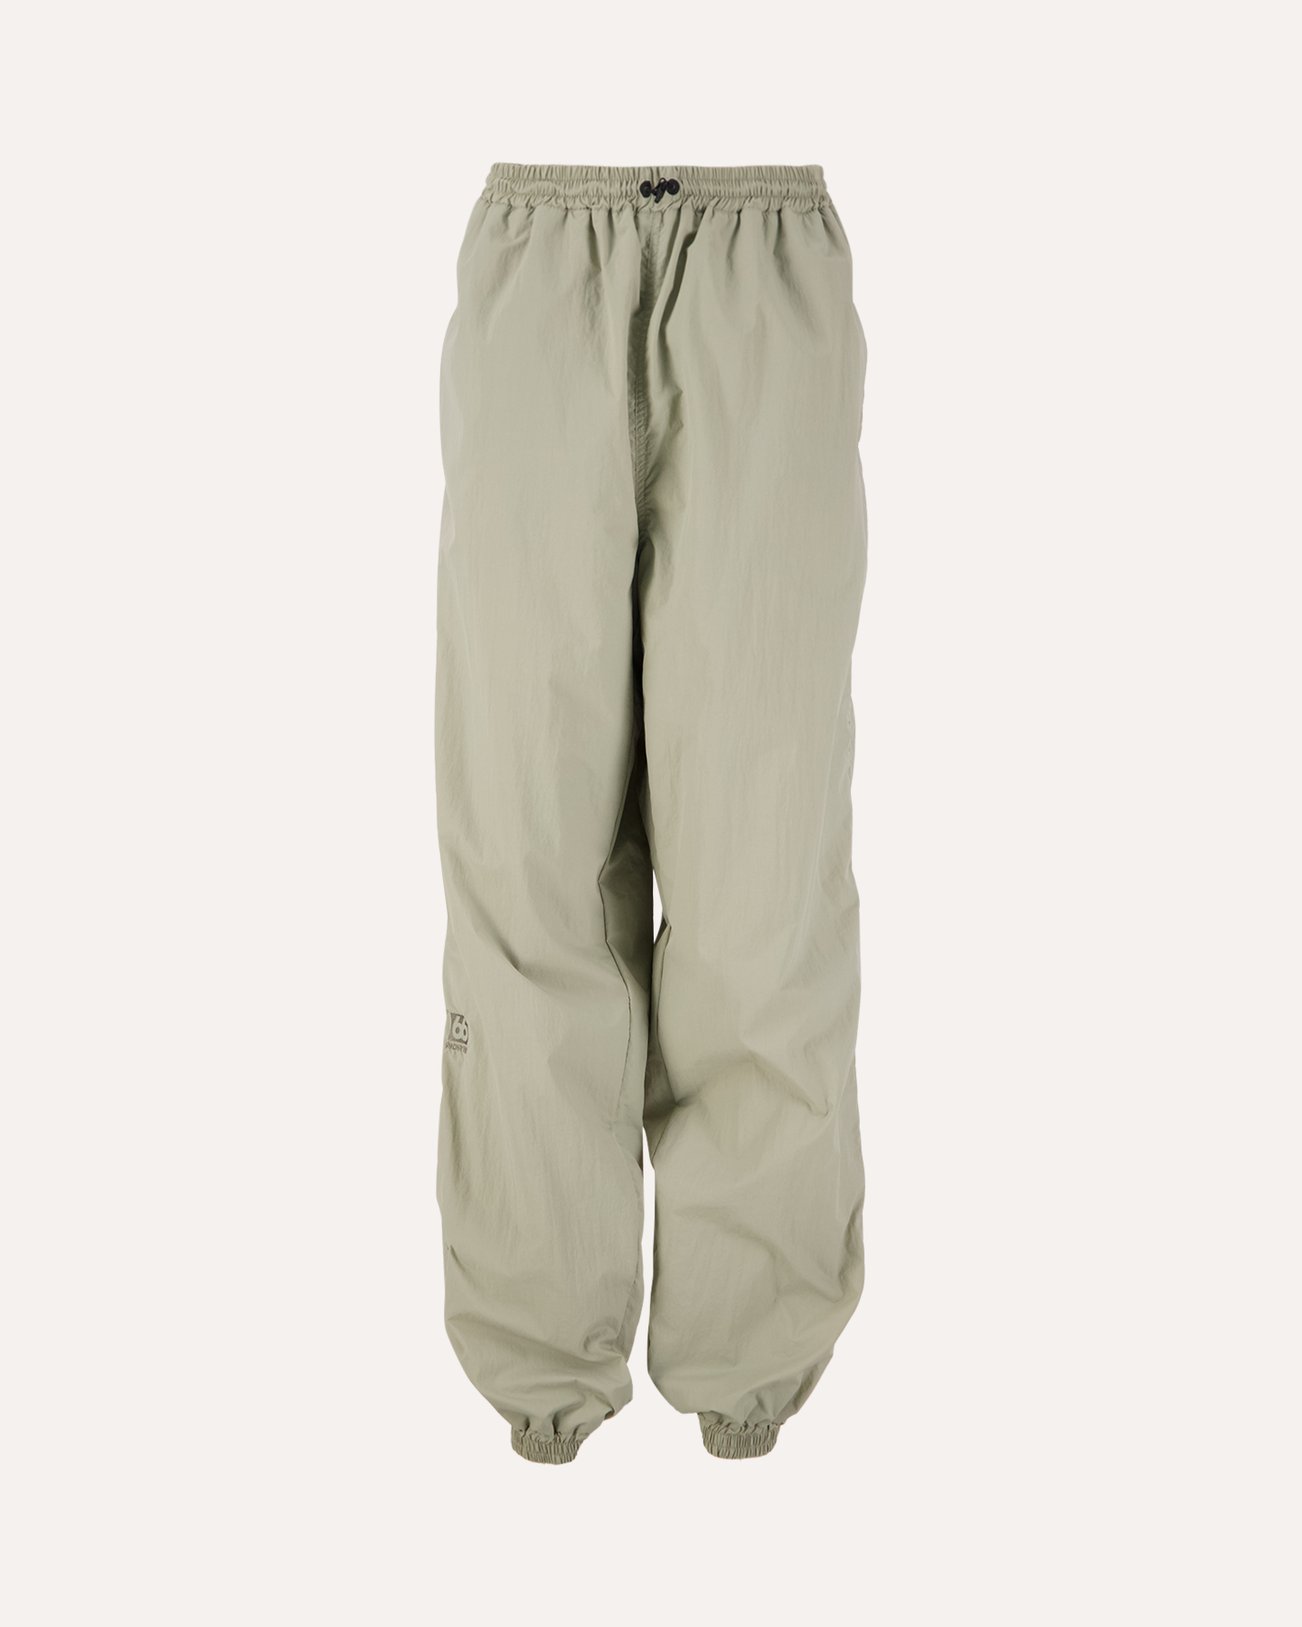 66 North Laugardalur Pants TAUPE 1